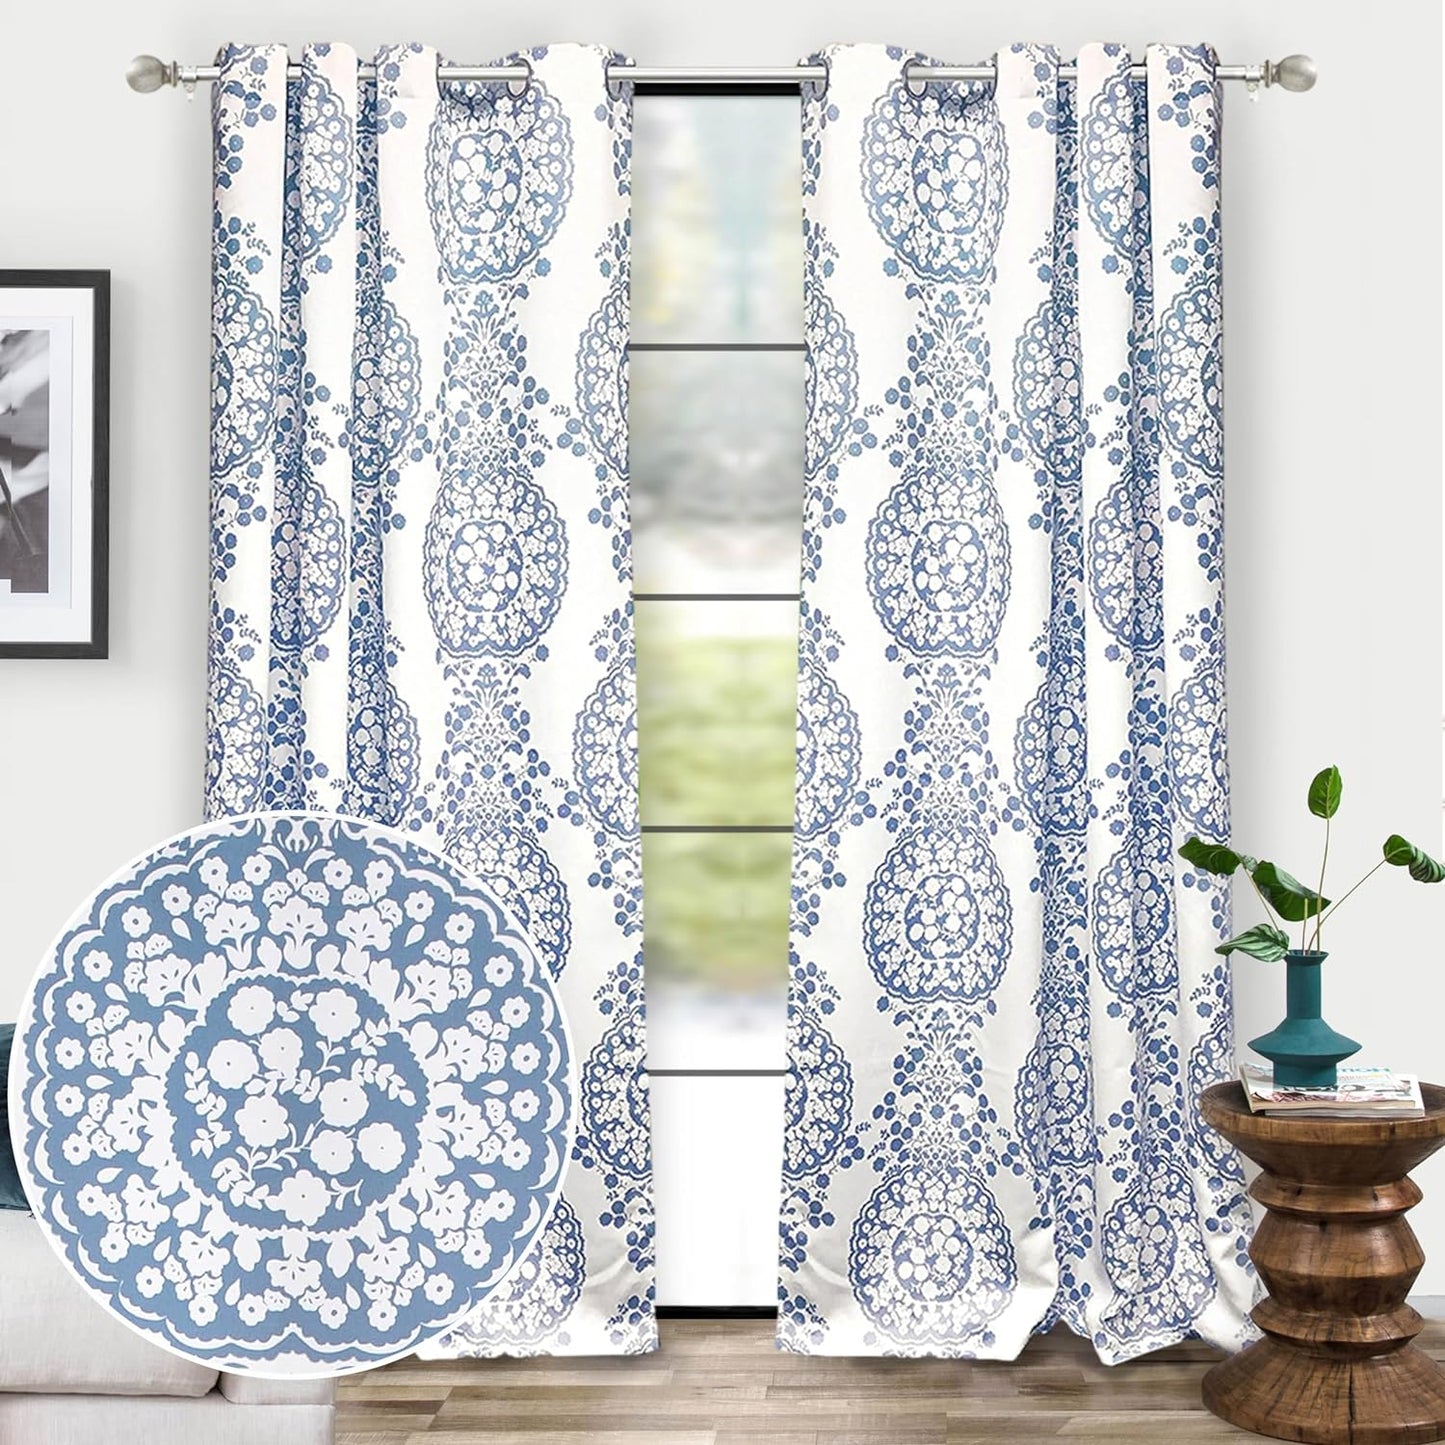 Driftaway Damask Curtains for Kitchen Bathroom Laundry Room Small Windows Floral Damask Medallion Patterned Adjustable Tie up Curtain Single 45 Inch by 63 Inch Dusty Blue  DriftAway Blue (16)52"X84"(Curtains) 